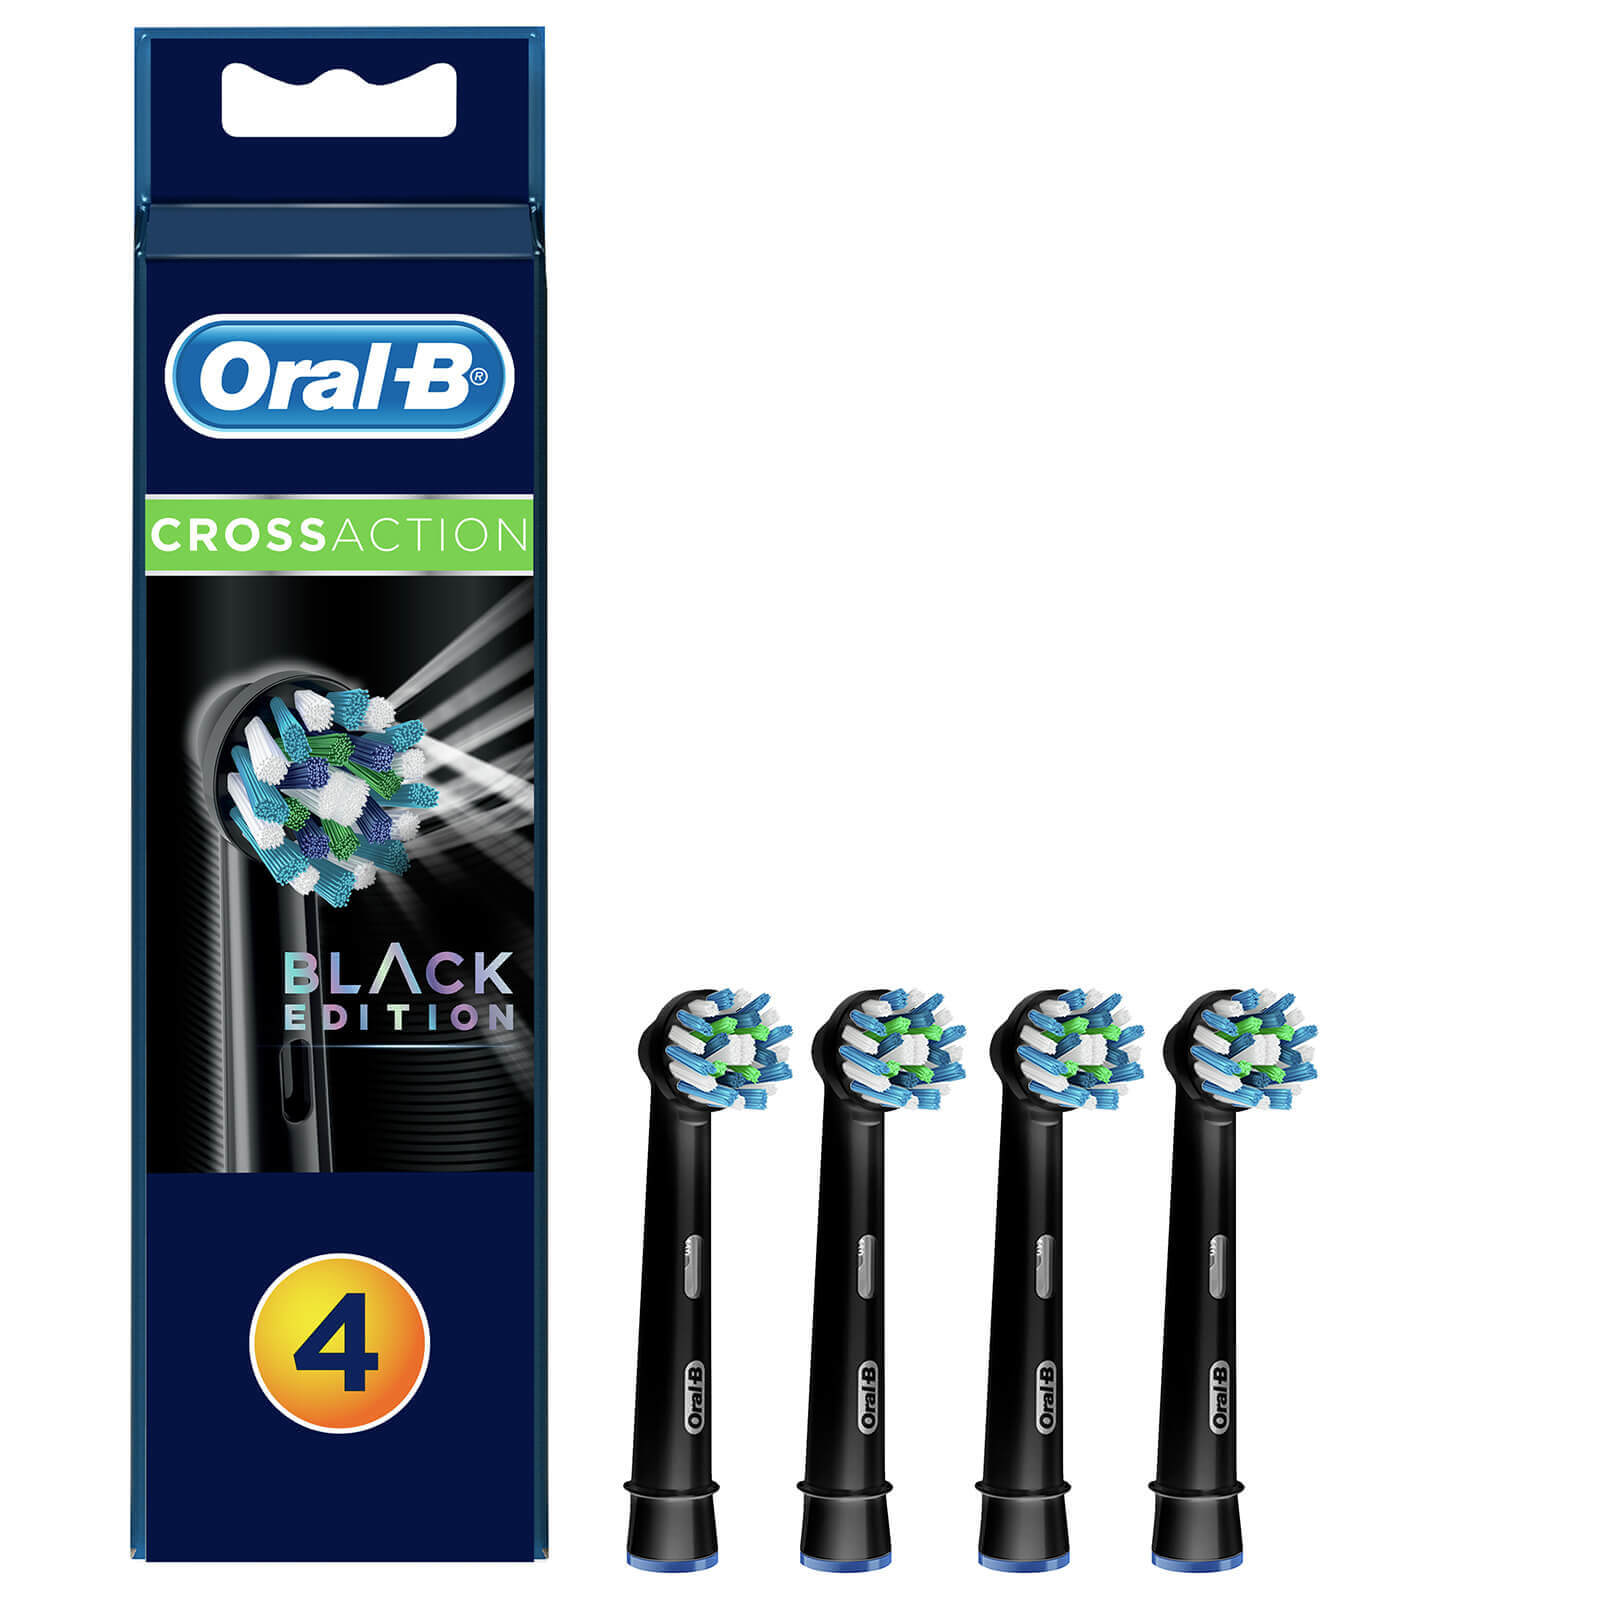 Oral-B CrossAction Replacement Electric Toothbrush Heads – Black Edition (Pack of 4) lookfantastic.com imagine